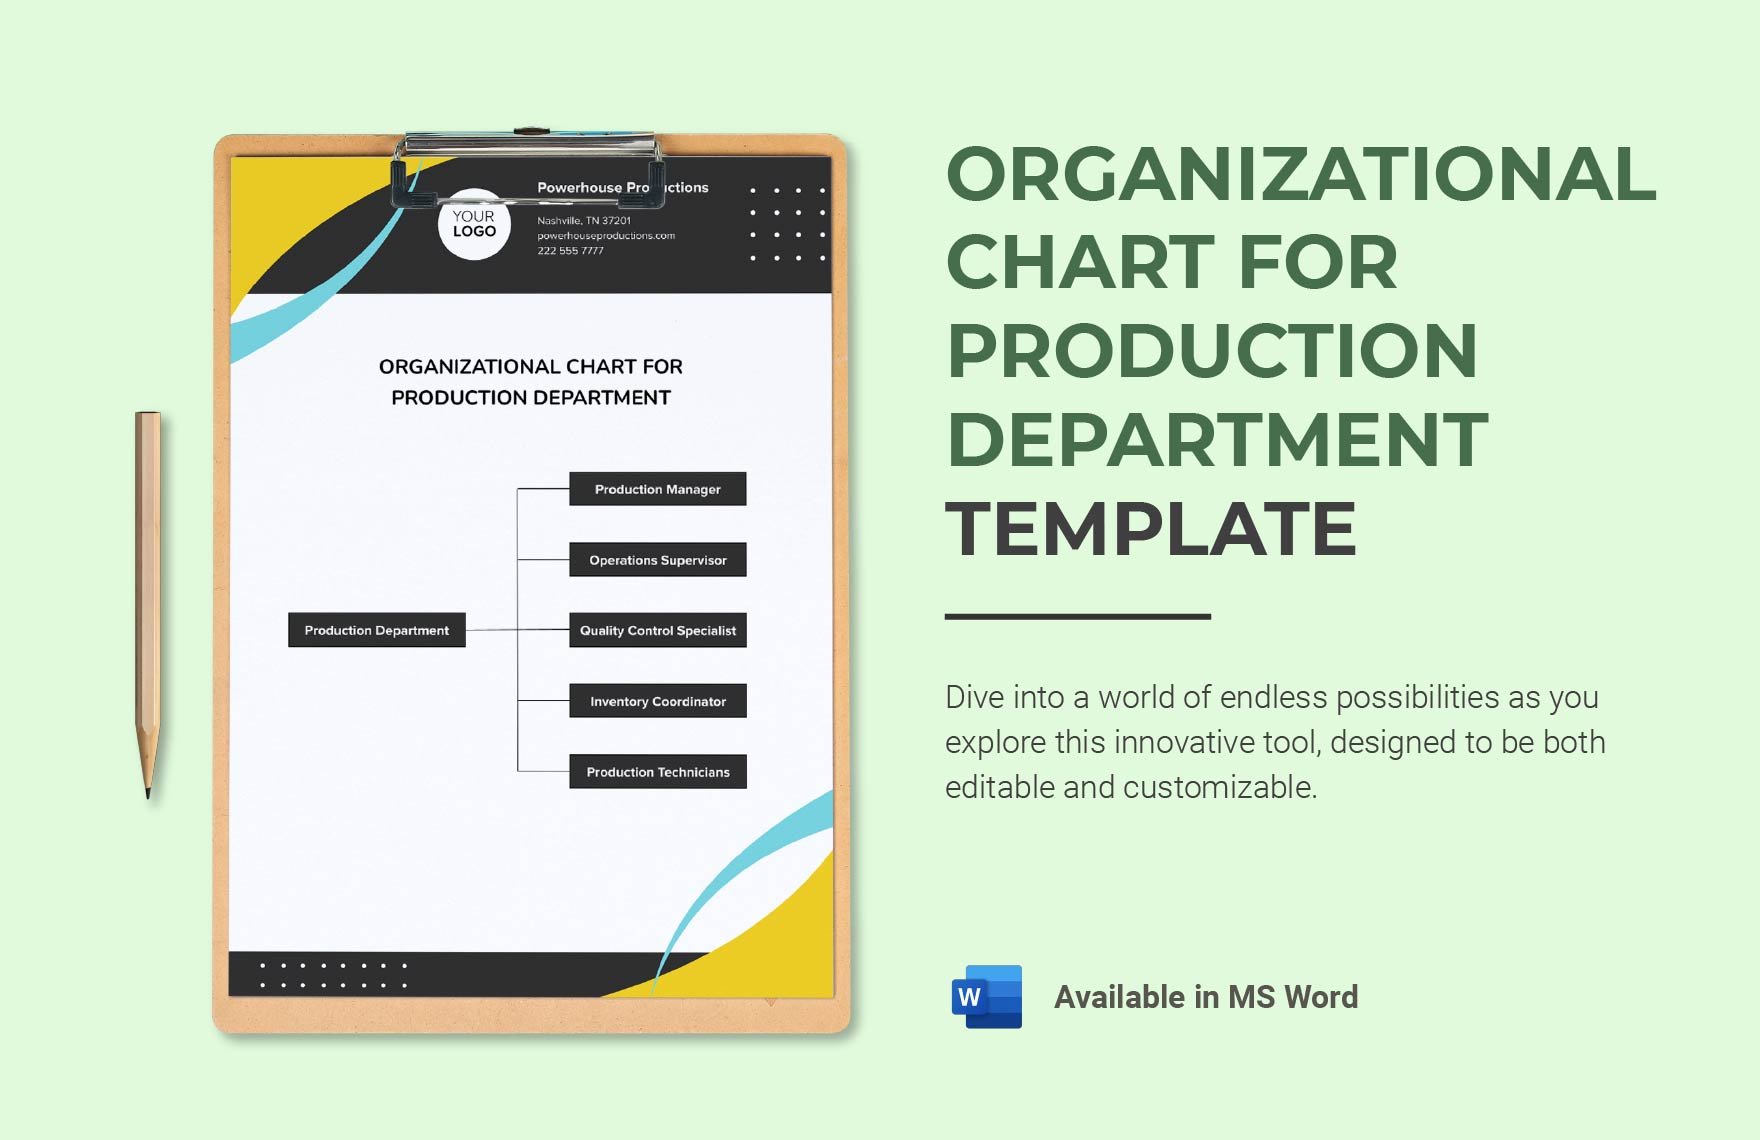 Organizational Chart for Production Department Template